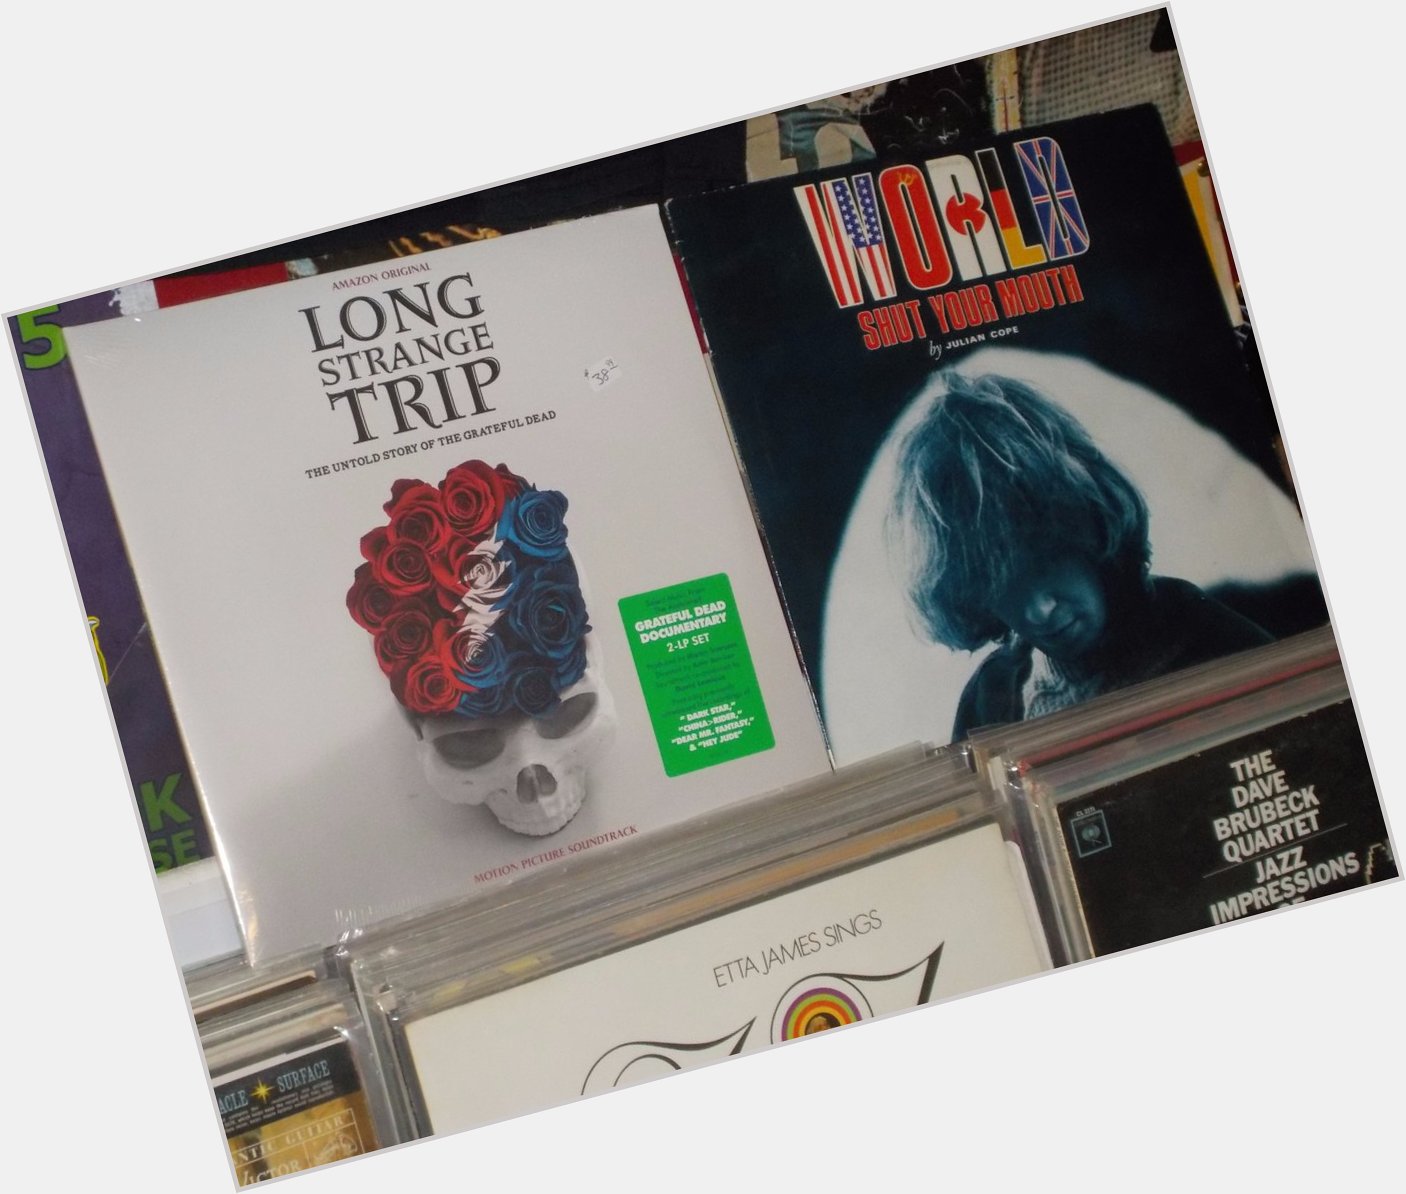 Happy Birthday to the late Brent Mydland of the Grateful Dead & Julian Cope 